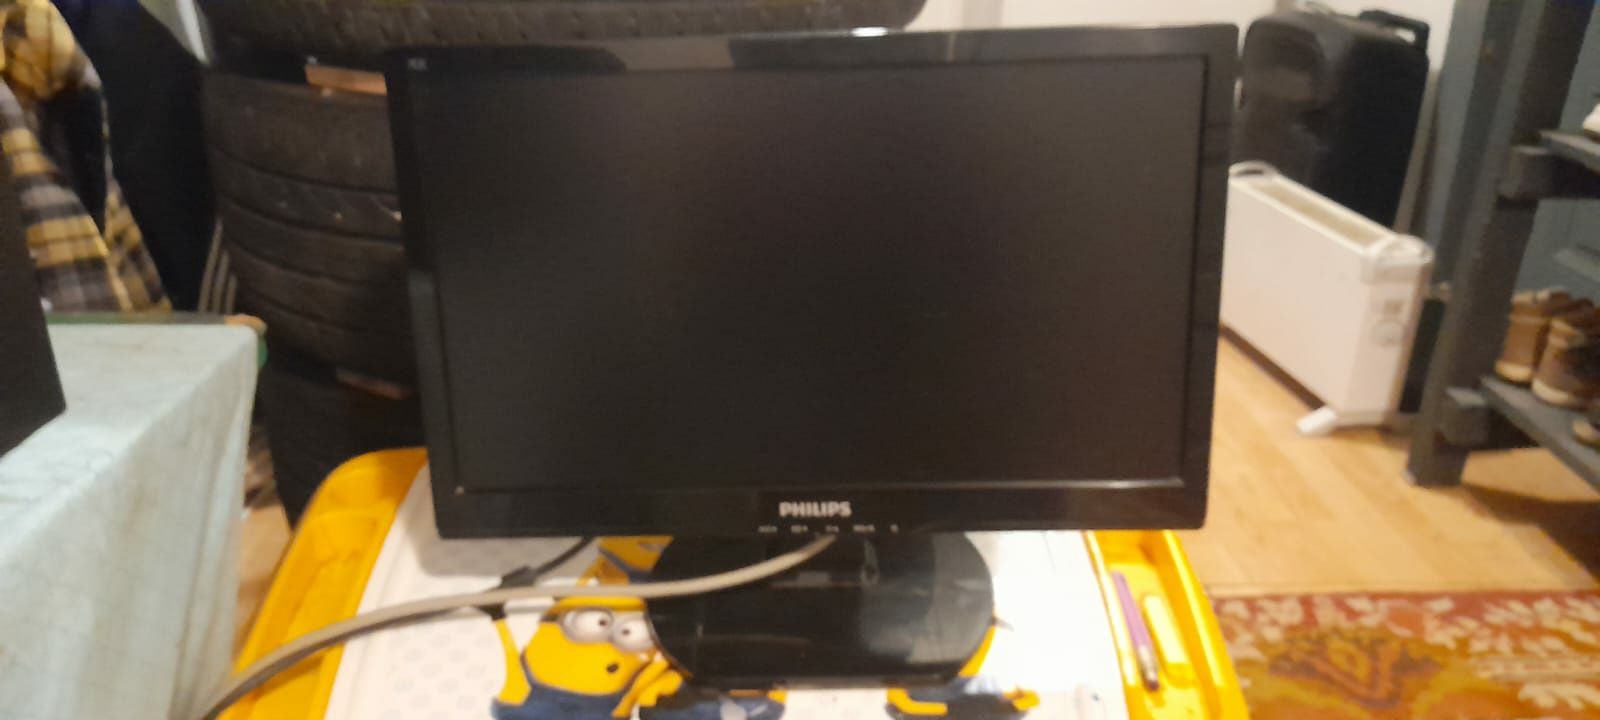 Monitor philips lcd 19 inch